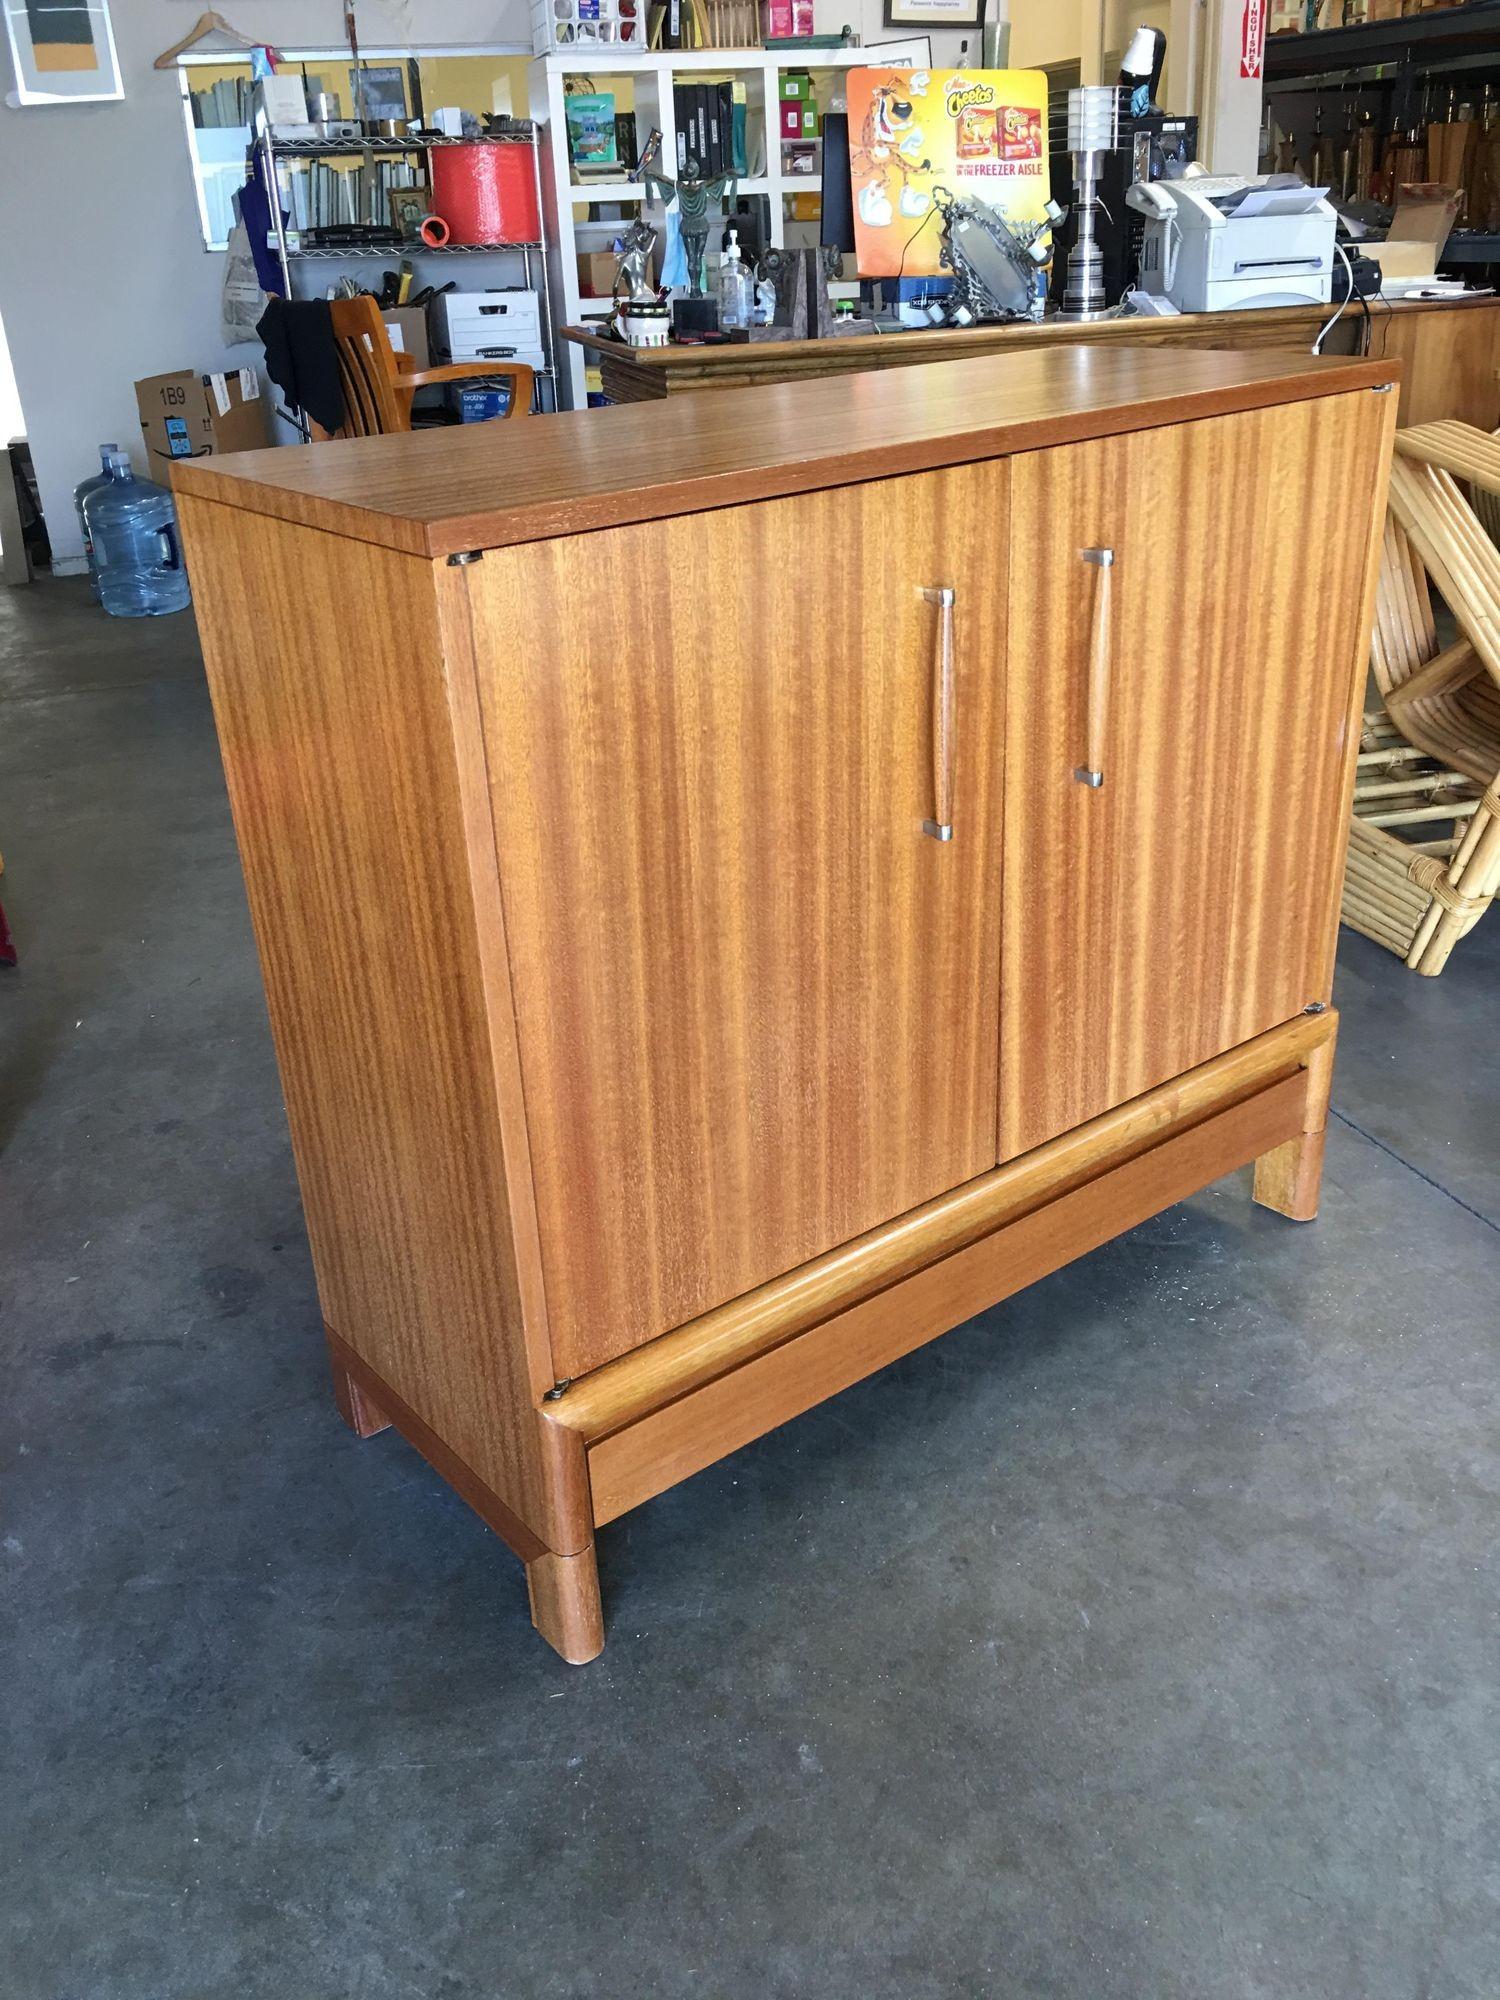 Midcentury Danish Modern Style Oak Sideboard Cabinet In Excellent Condition For Sale In Van Nuys, CA